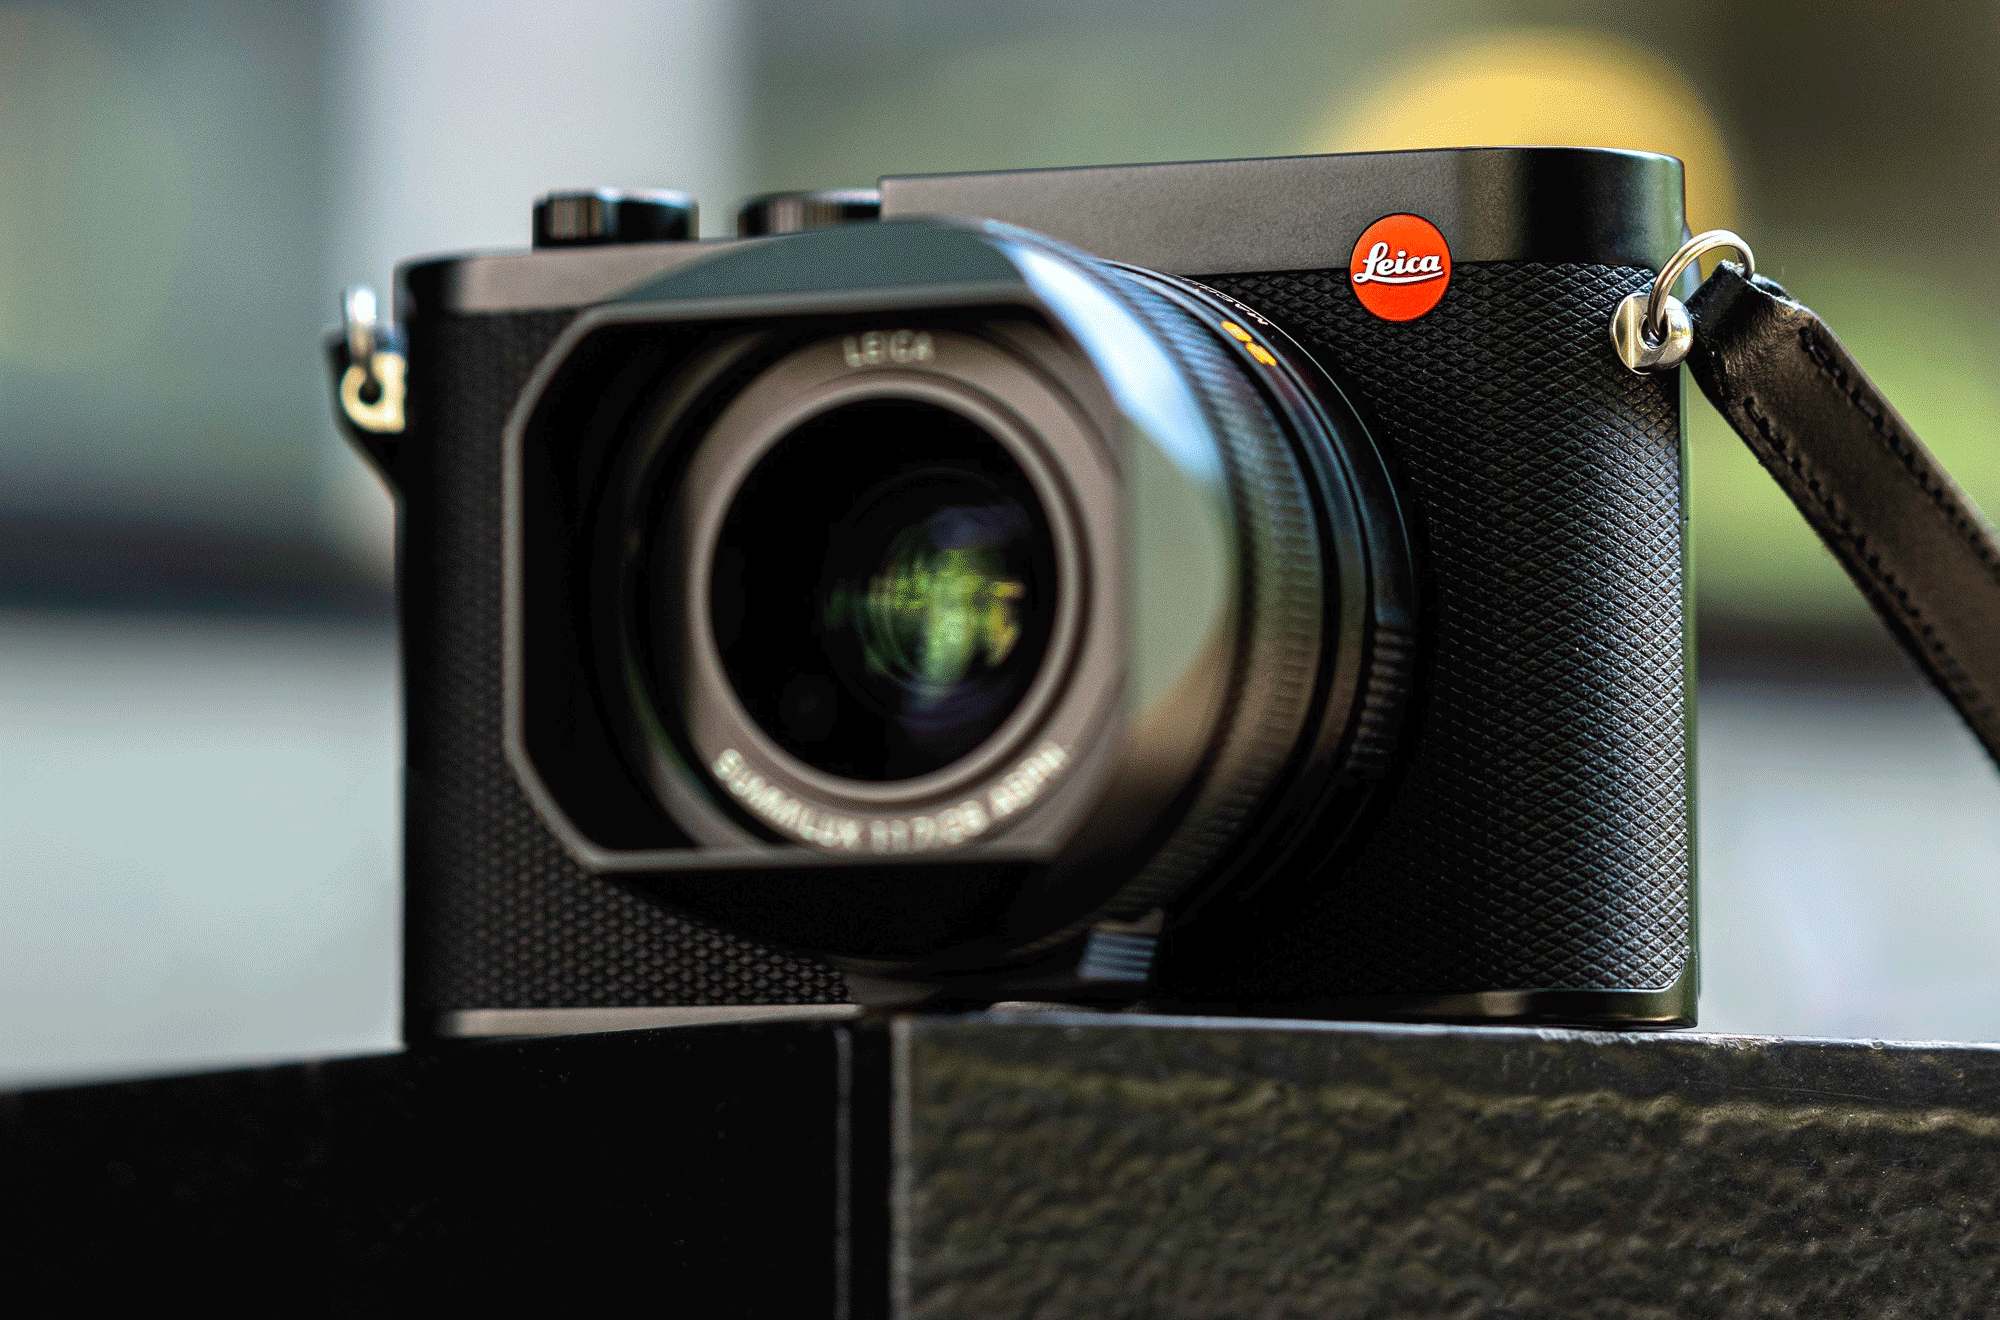 New Firmware Update for the Leica Q3